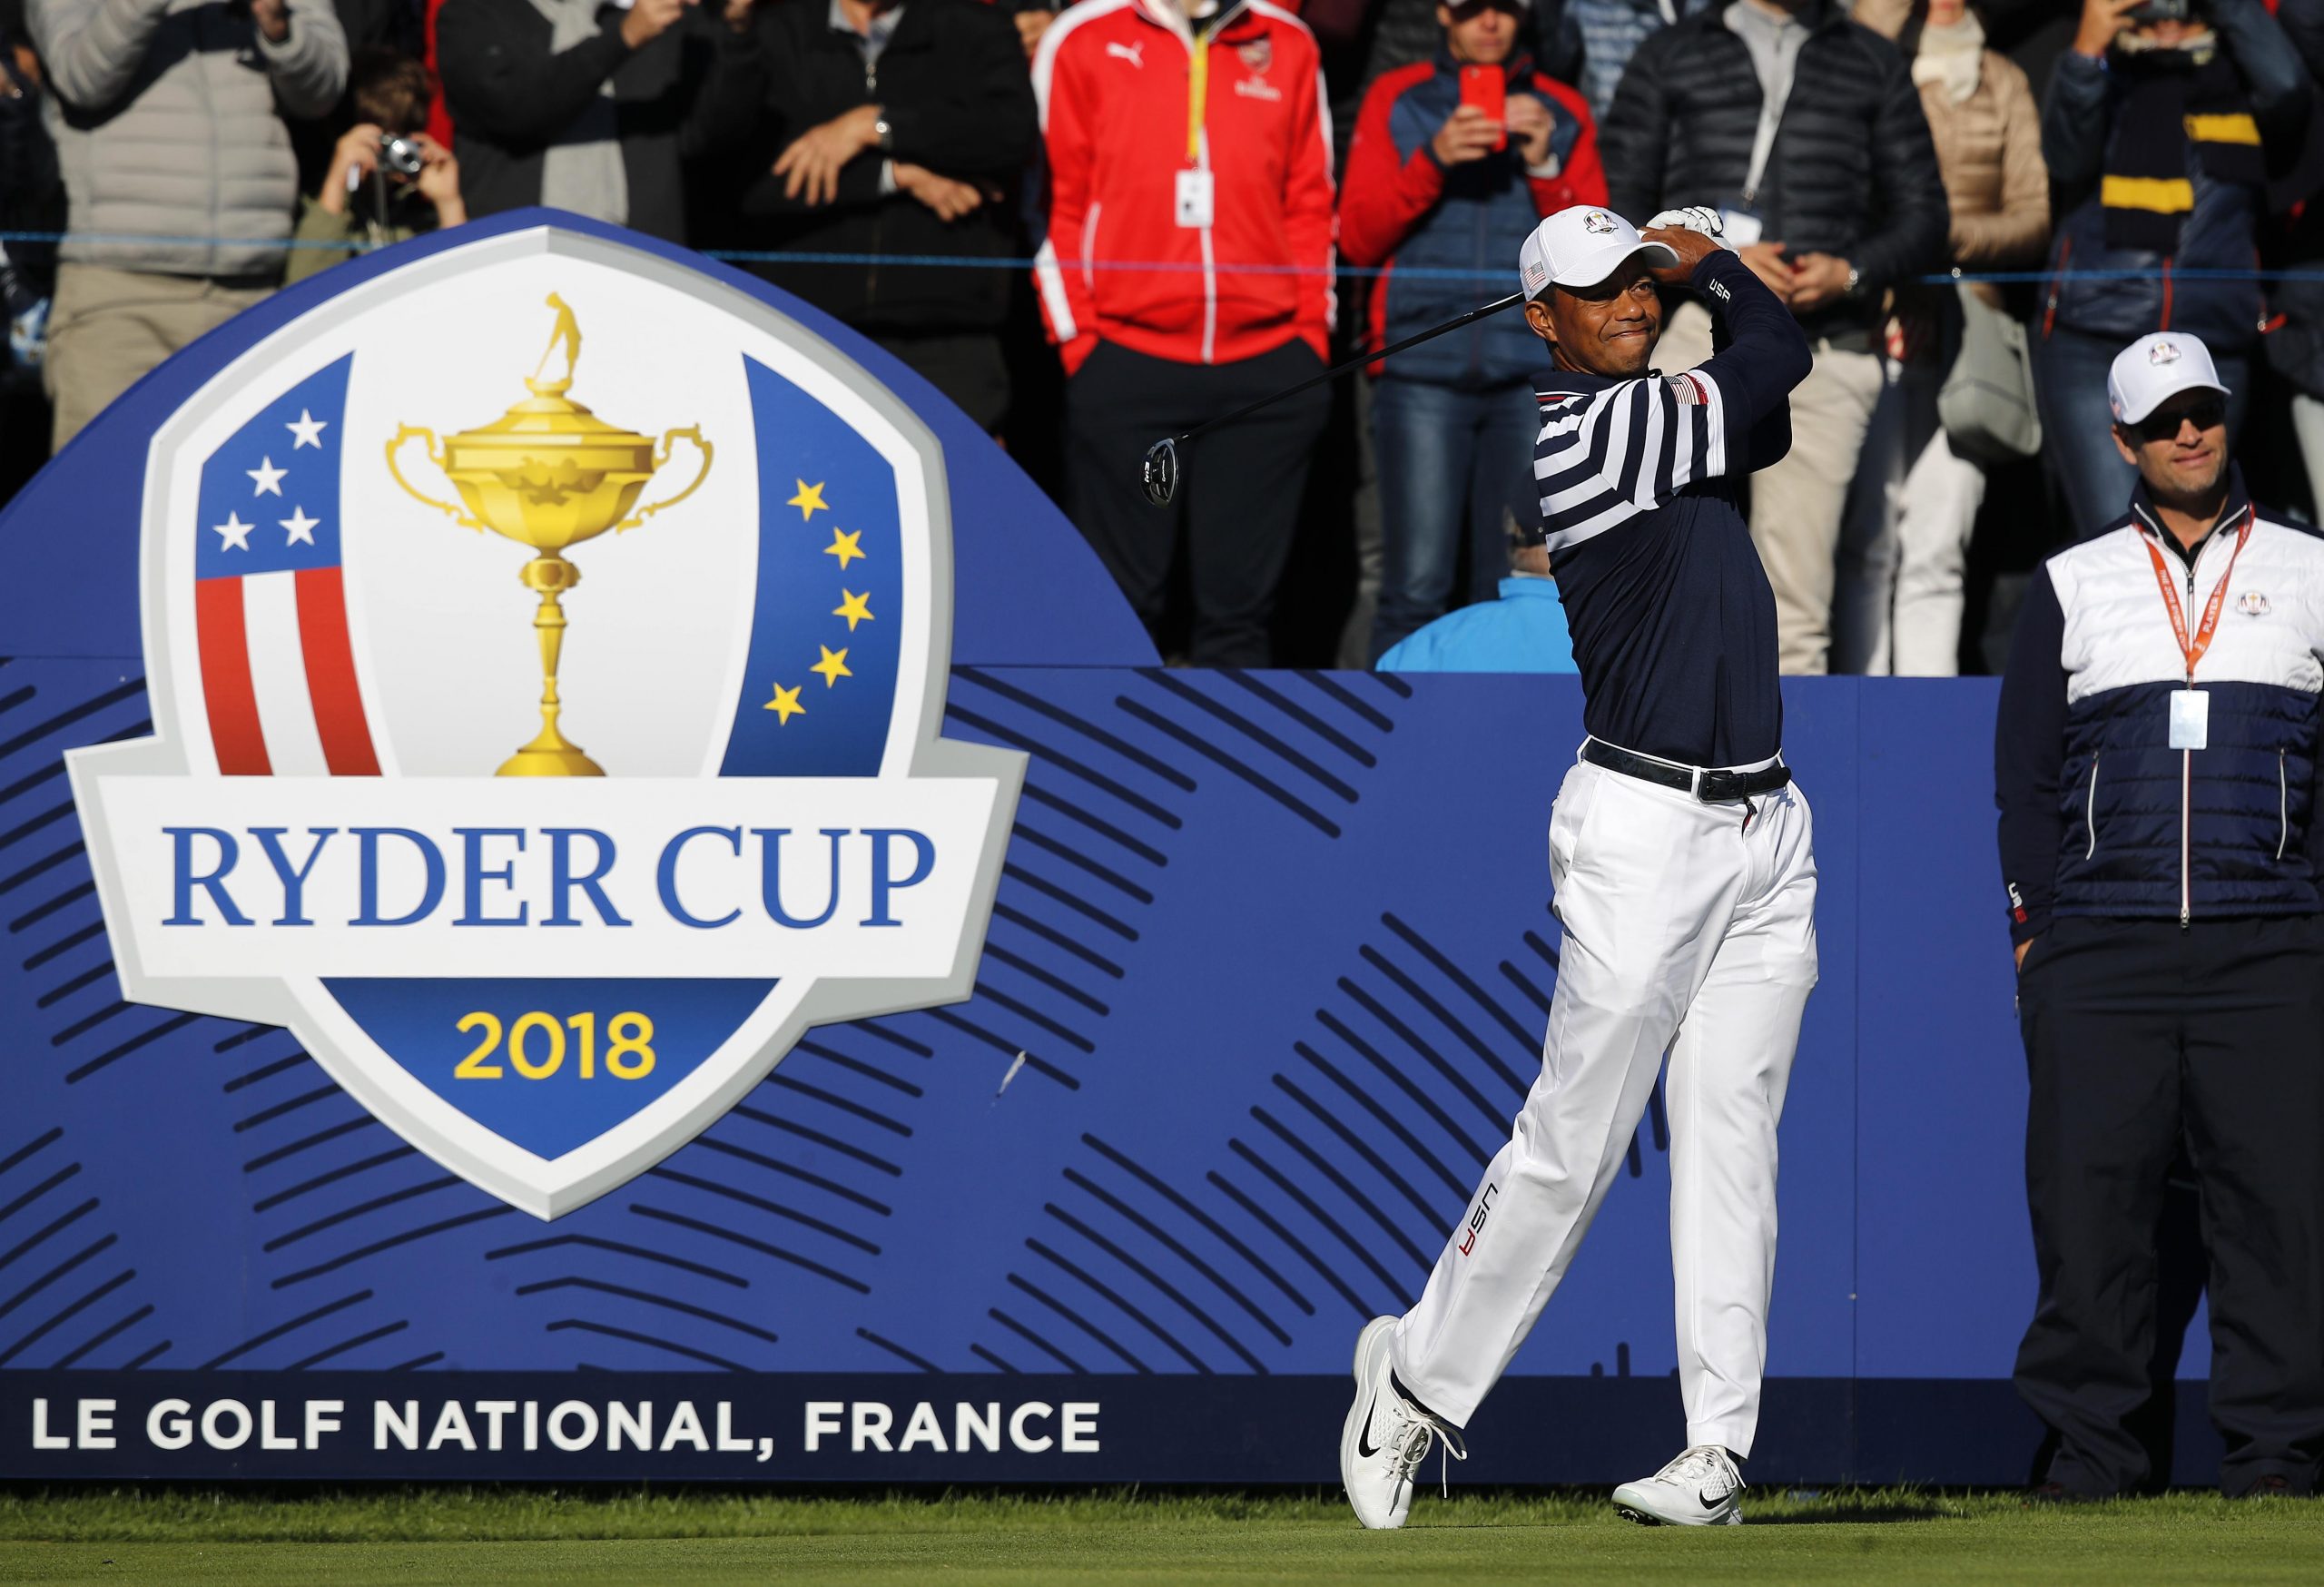 Ryder Cup United States Rated as Slight Favorite Against Team Europe